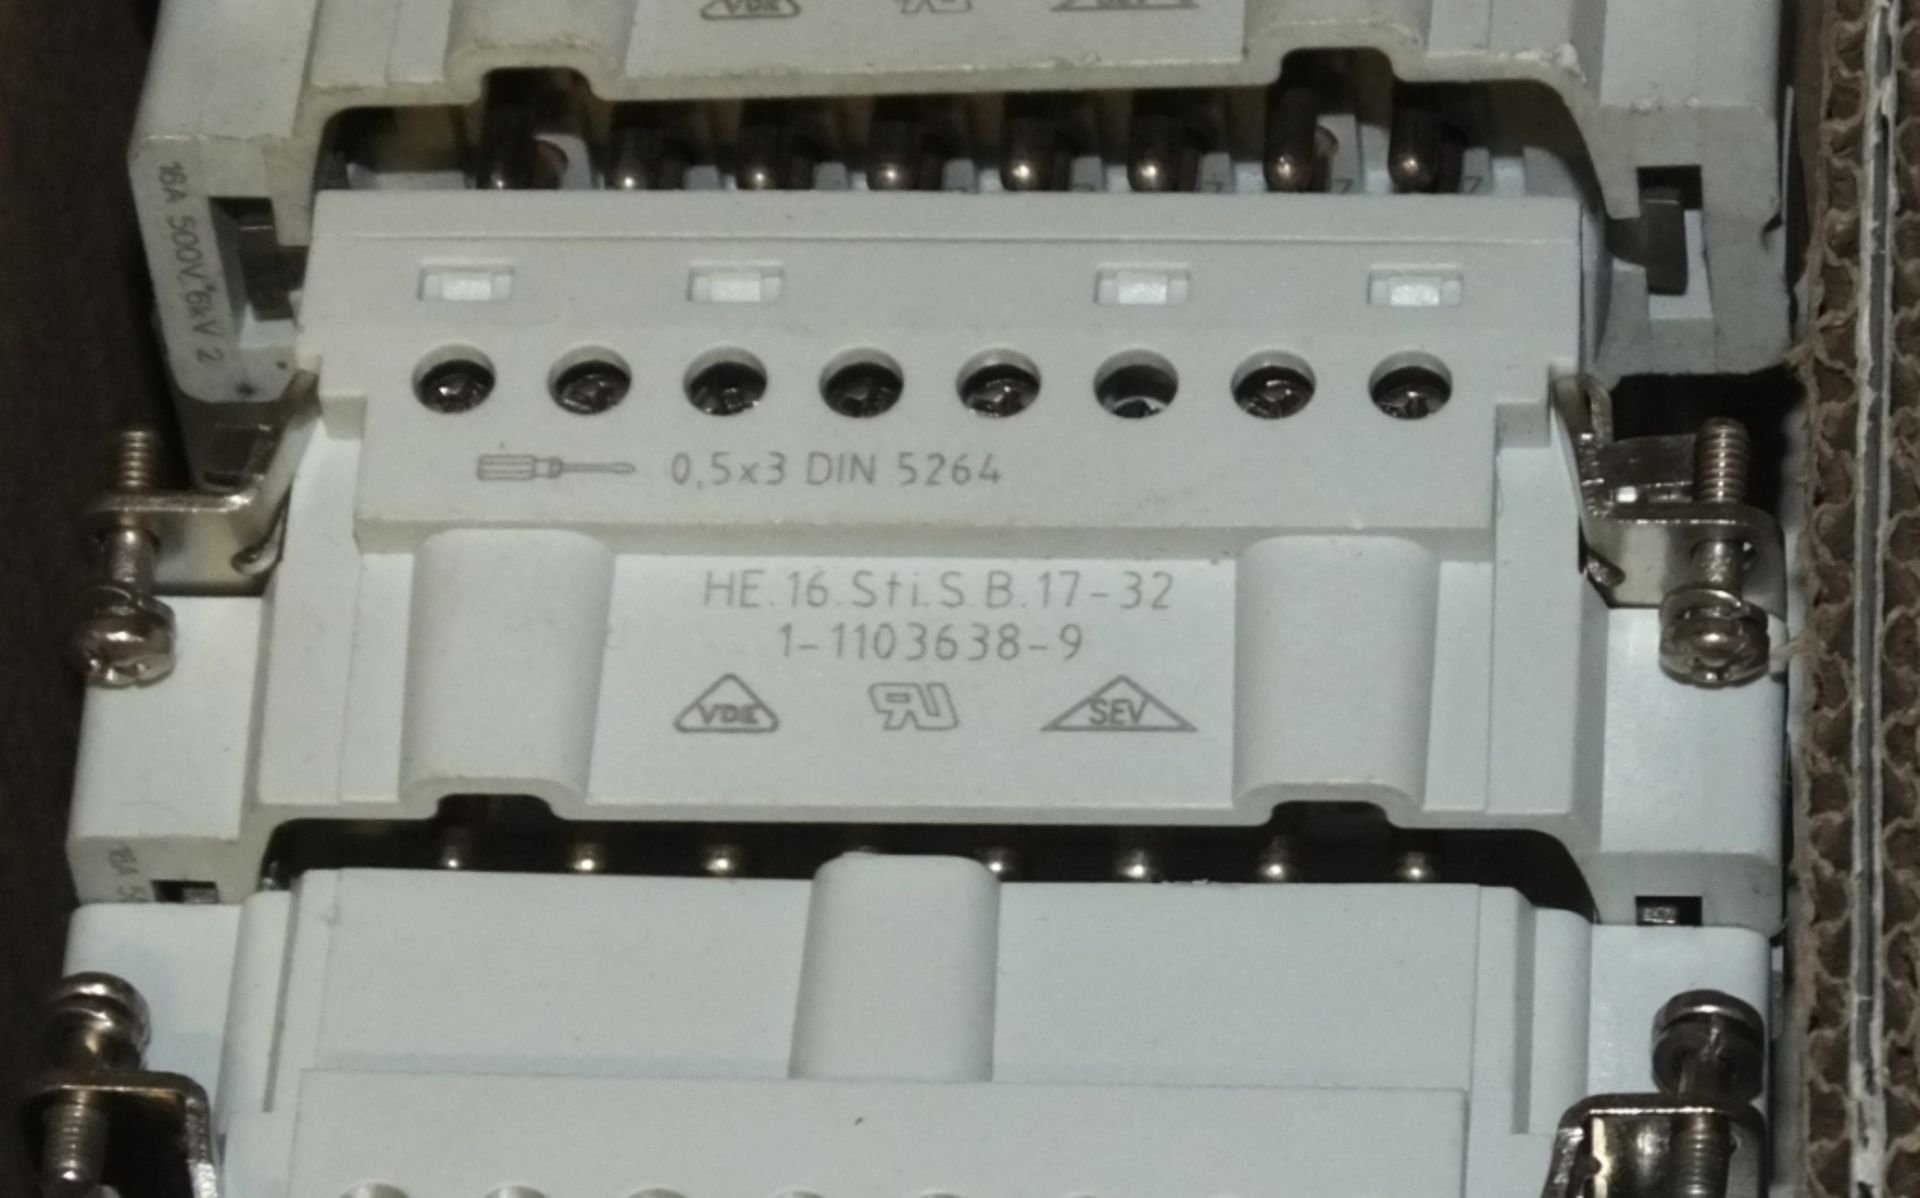 35x Cable Connectors - HE-16 Bu Sti B 17-32 - 1-1103639-9 - Image 2 of 2